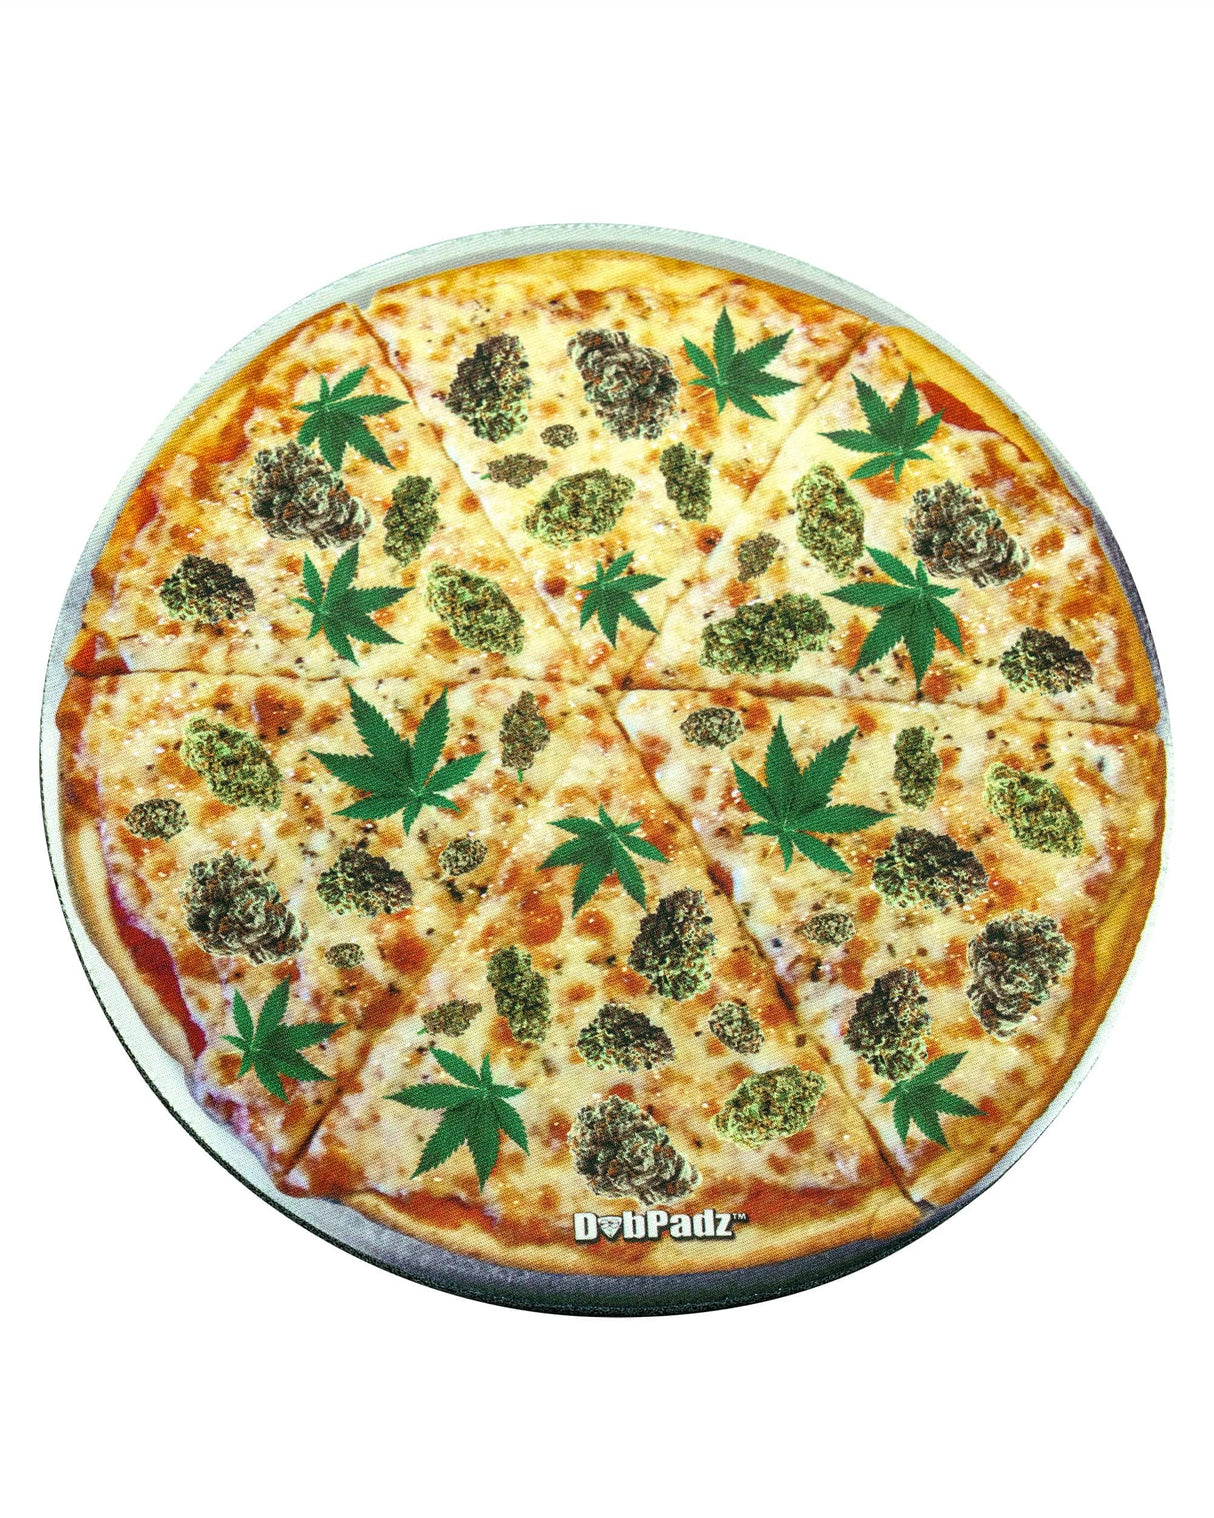 DabPadz 8" Rubber Dropmat with Pizza and Cannabis Leaf Design - Top View